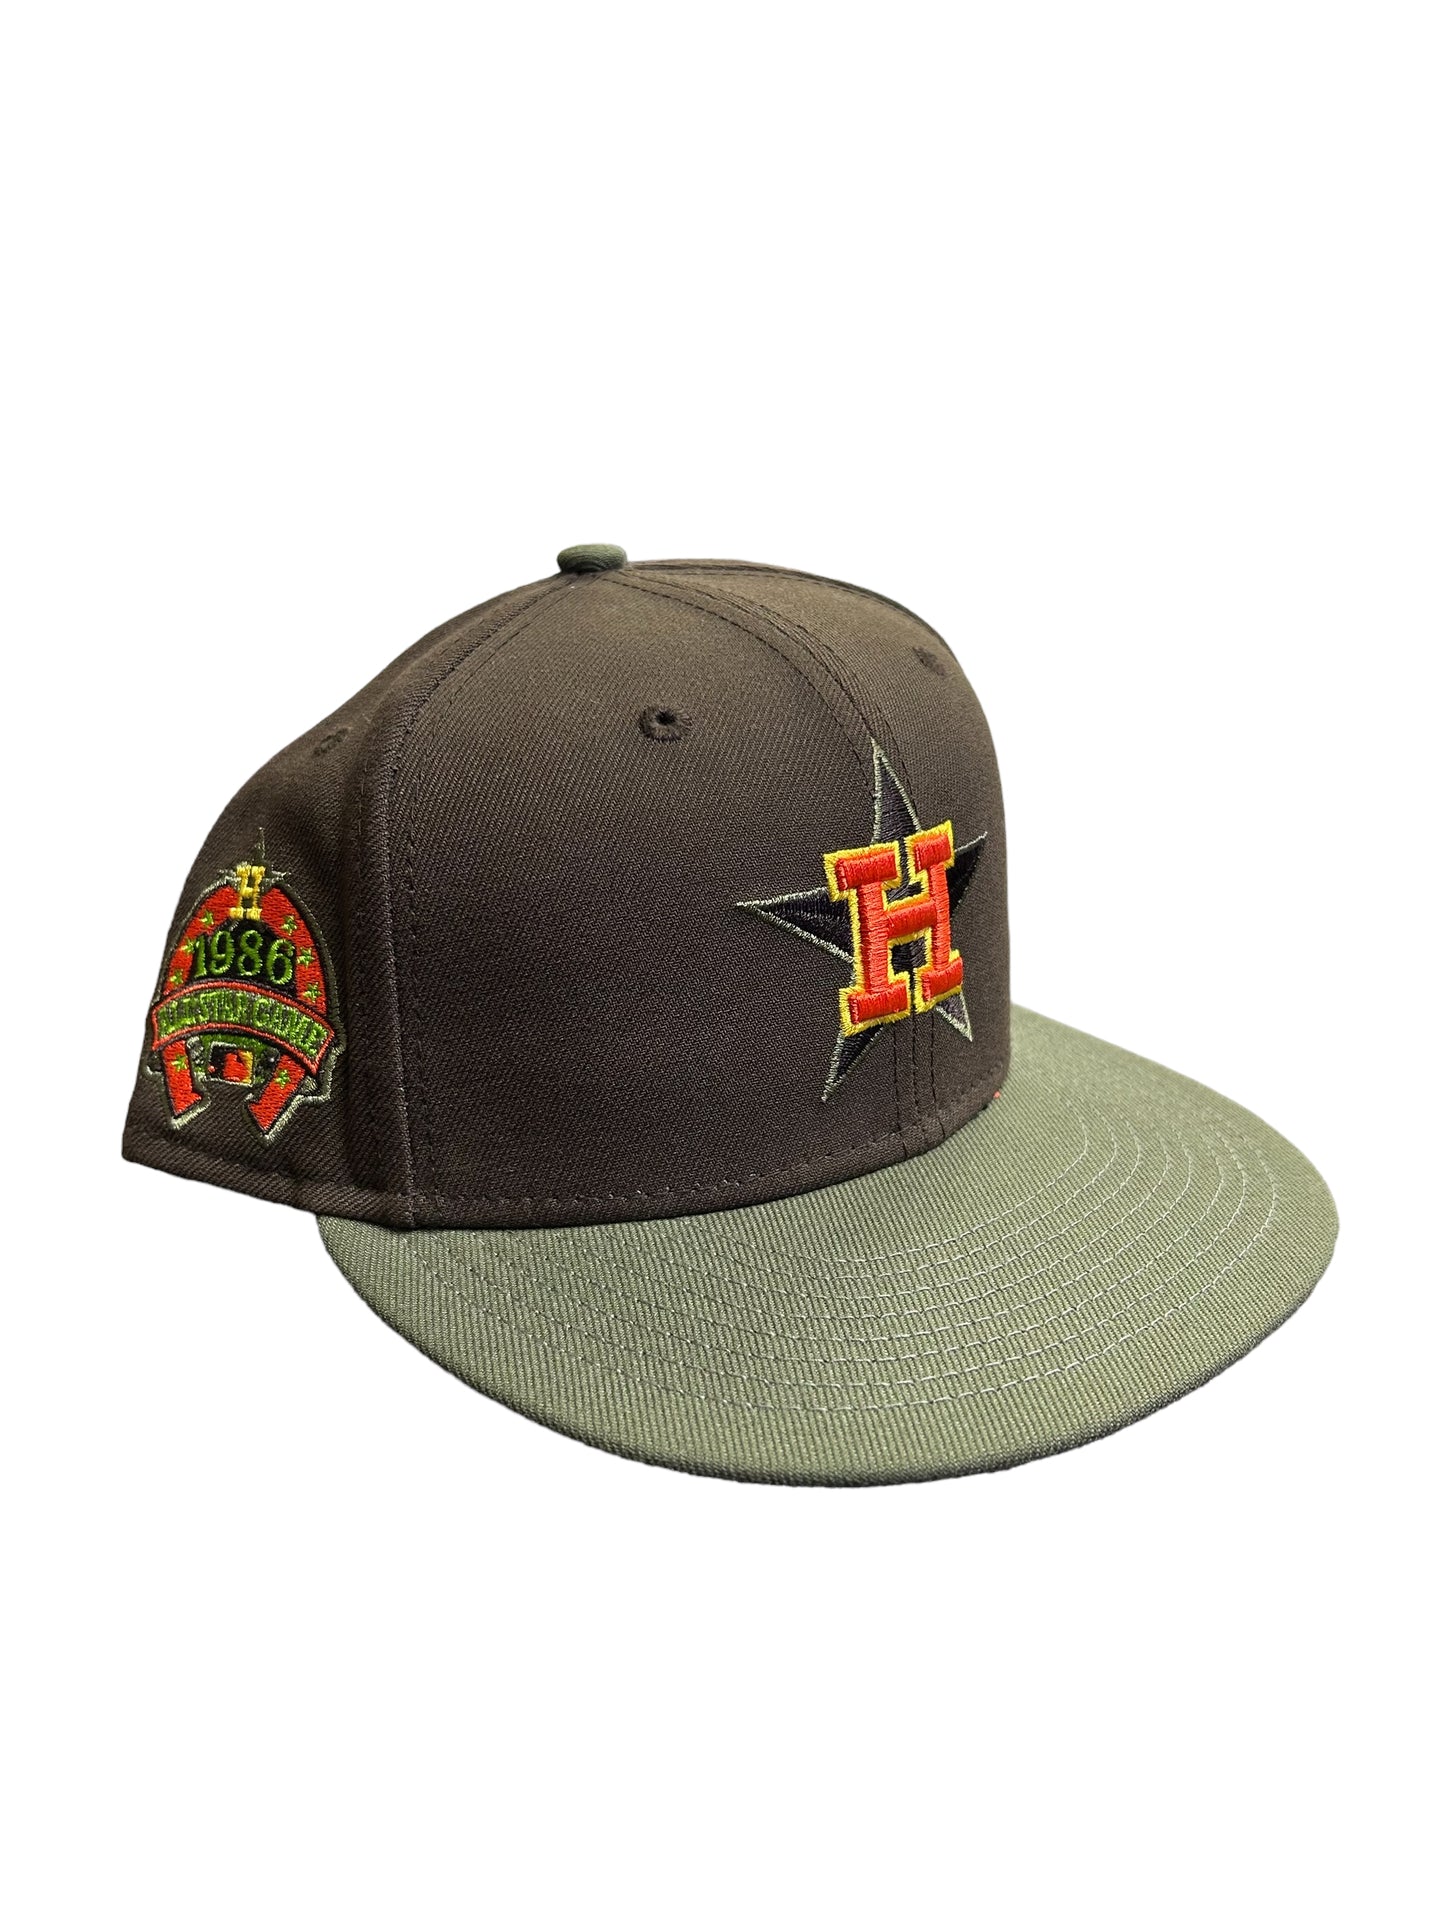 Houston Astros Brown/Olive Green Hat